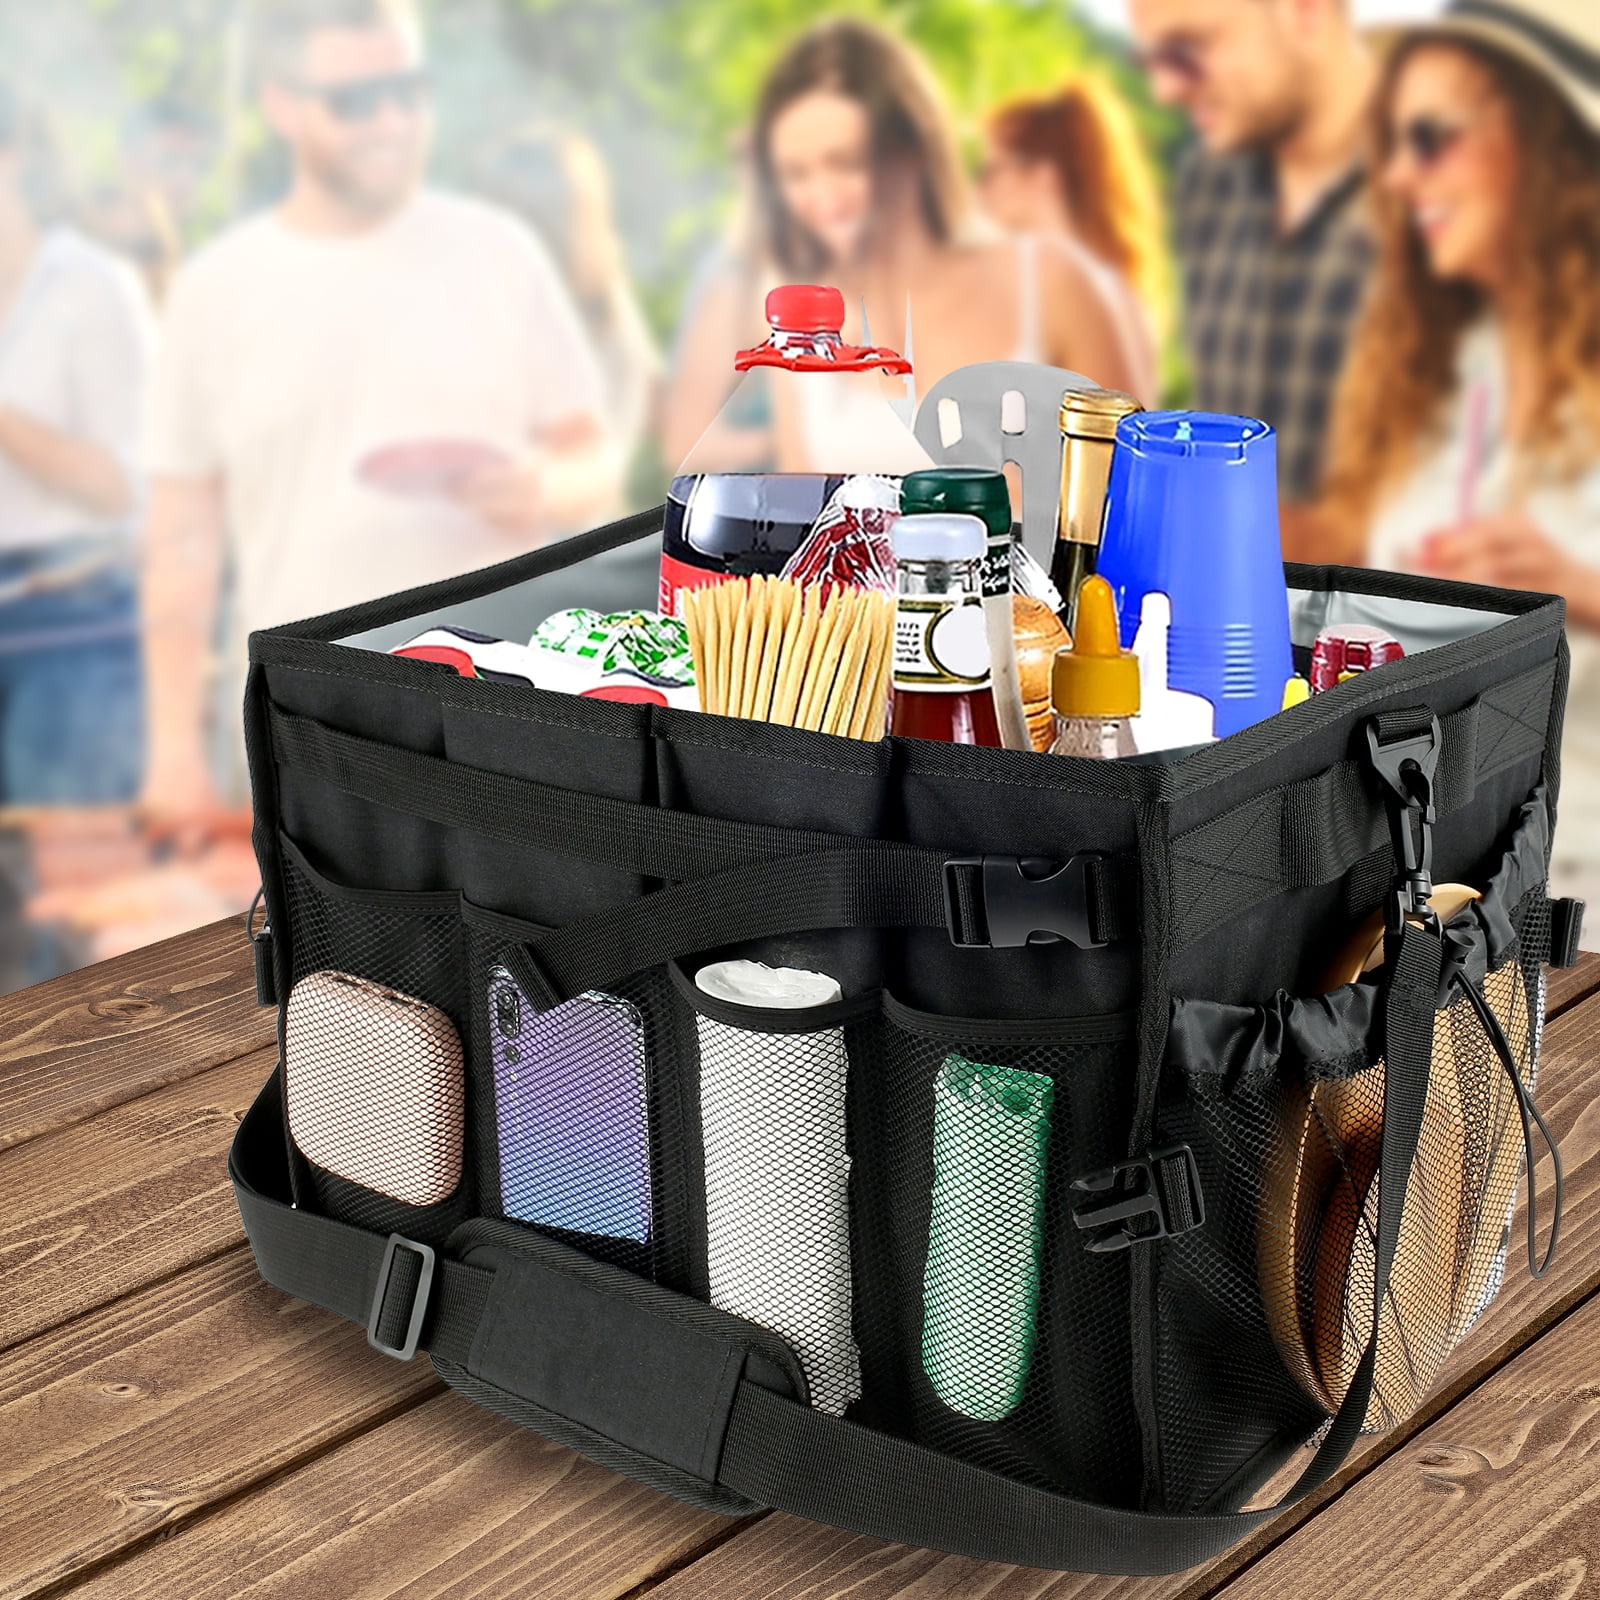 Griddle Grilling Tool Storage Organizer, BBQ Picnic Utensil Rack, Portable  Utensil Holder with Paper Towel Holder for Deck Patio RV Barbecue Argent 